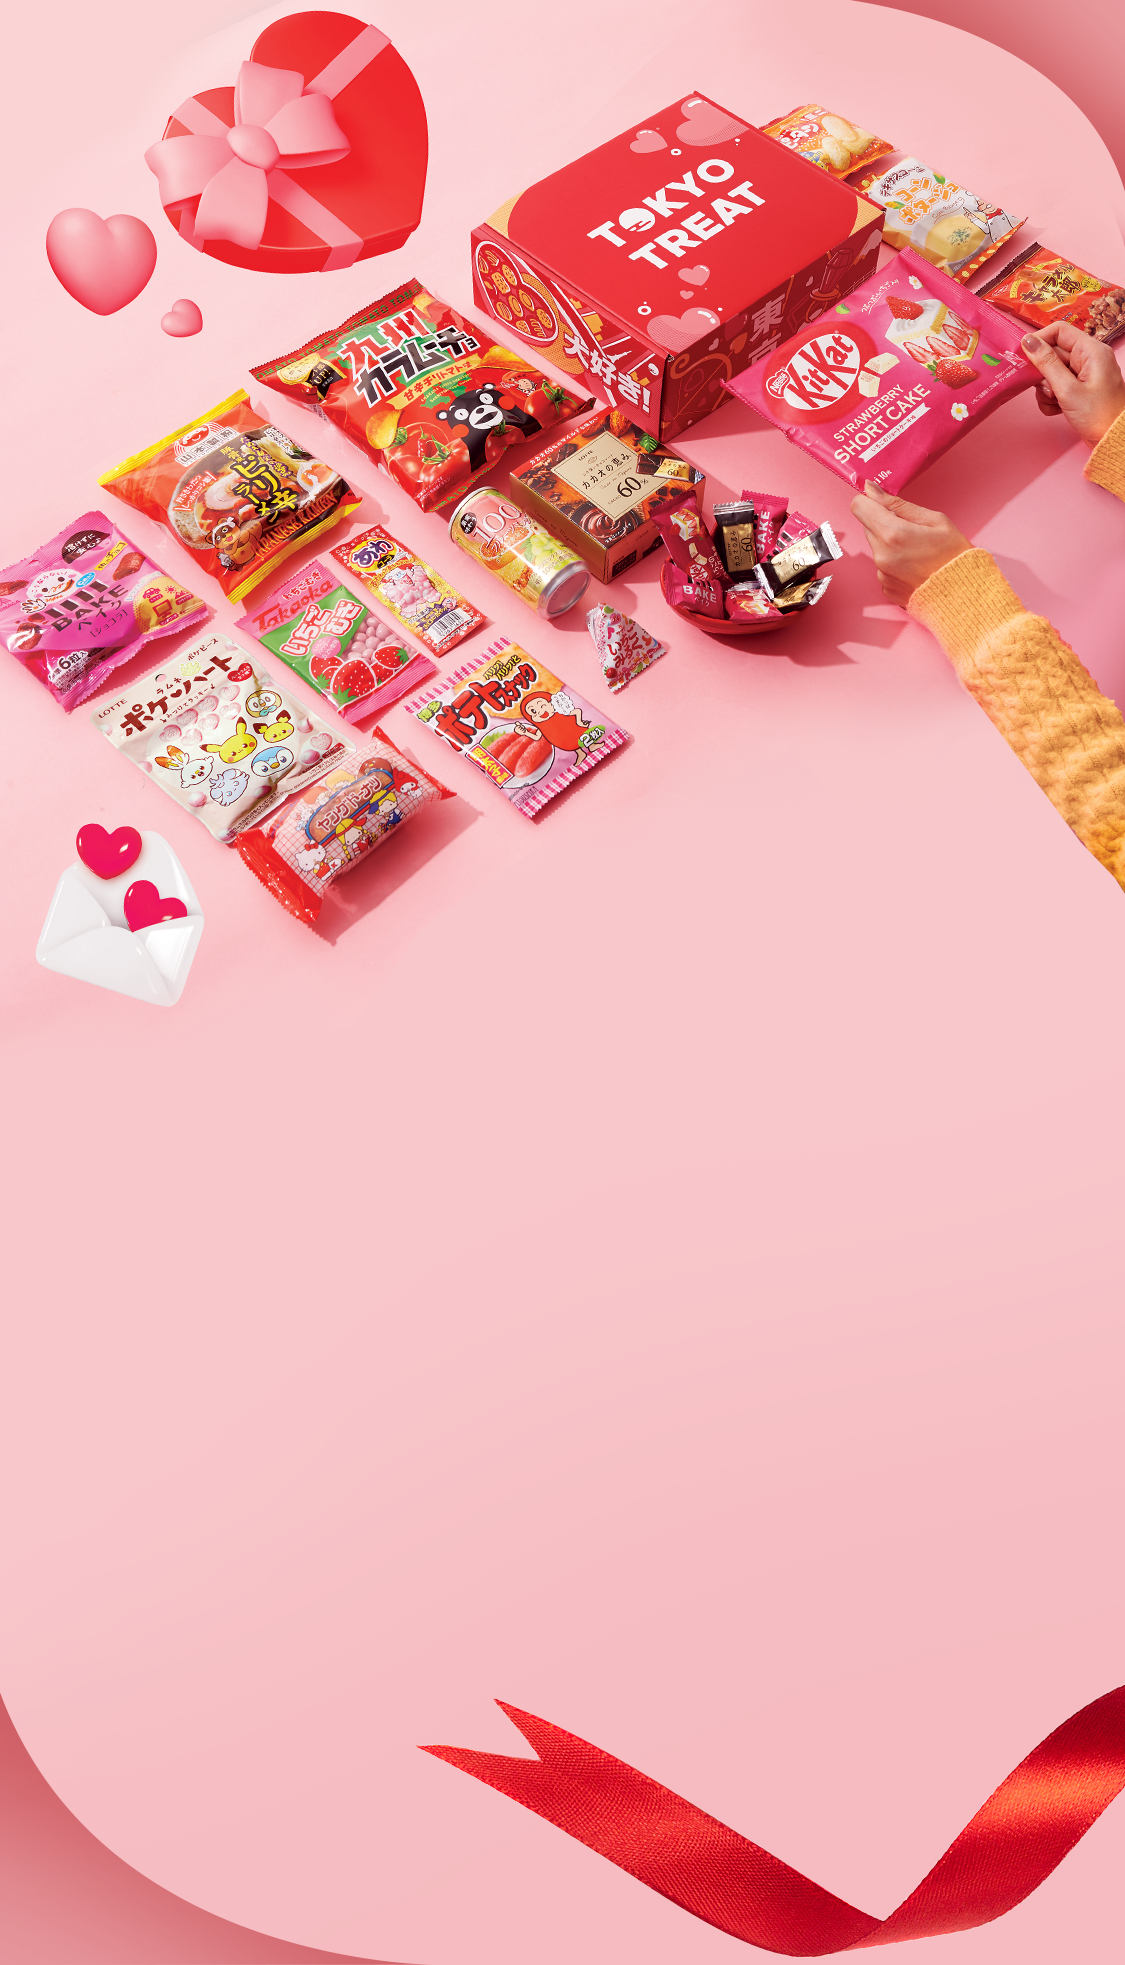 TokyoTreat box sits againt a pink background, surrounded by Valentine items and motifs.